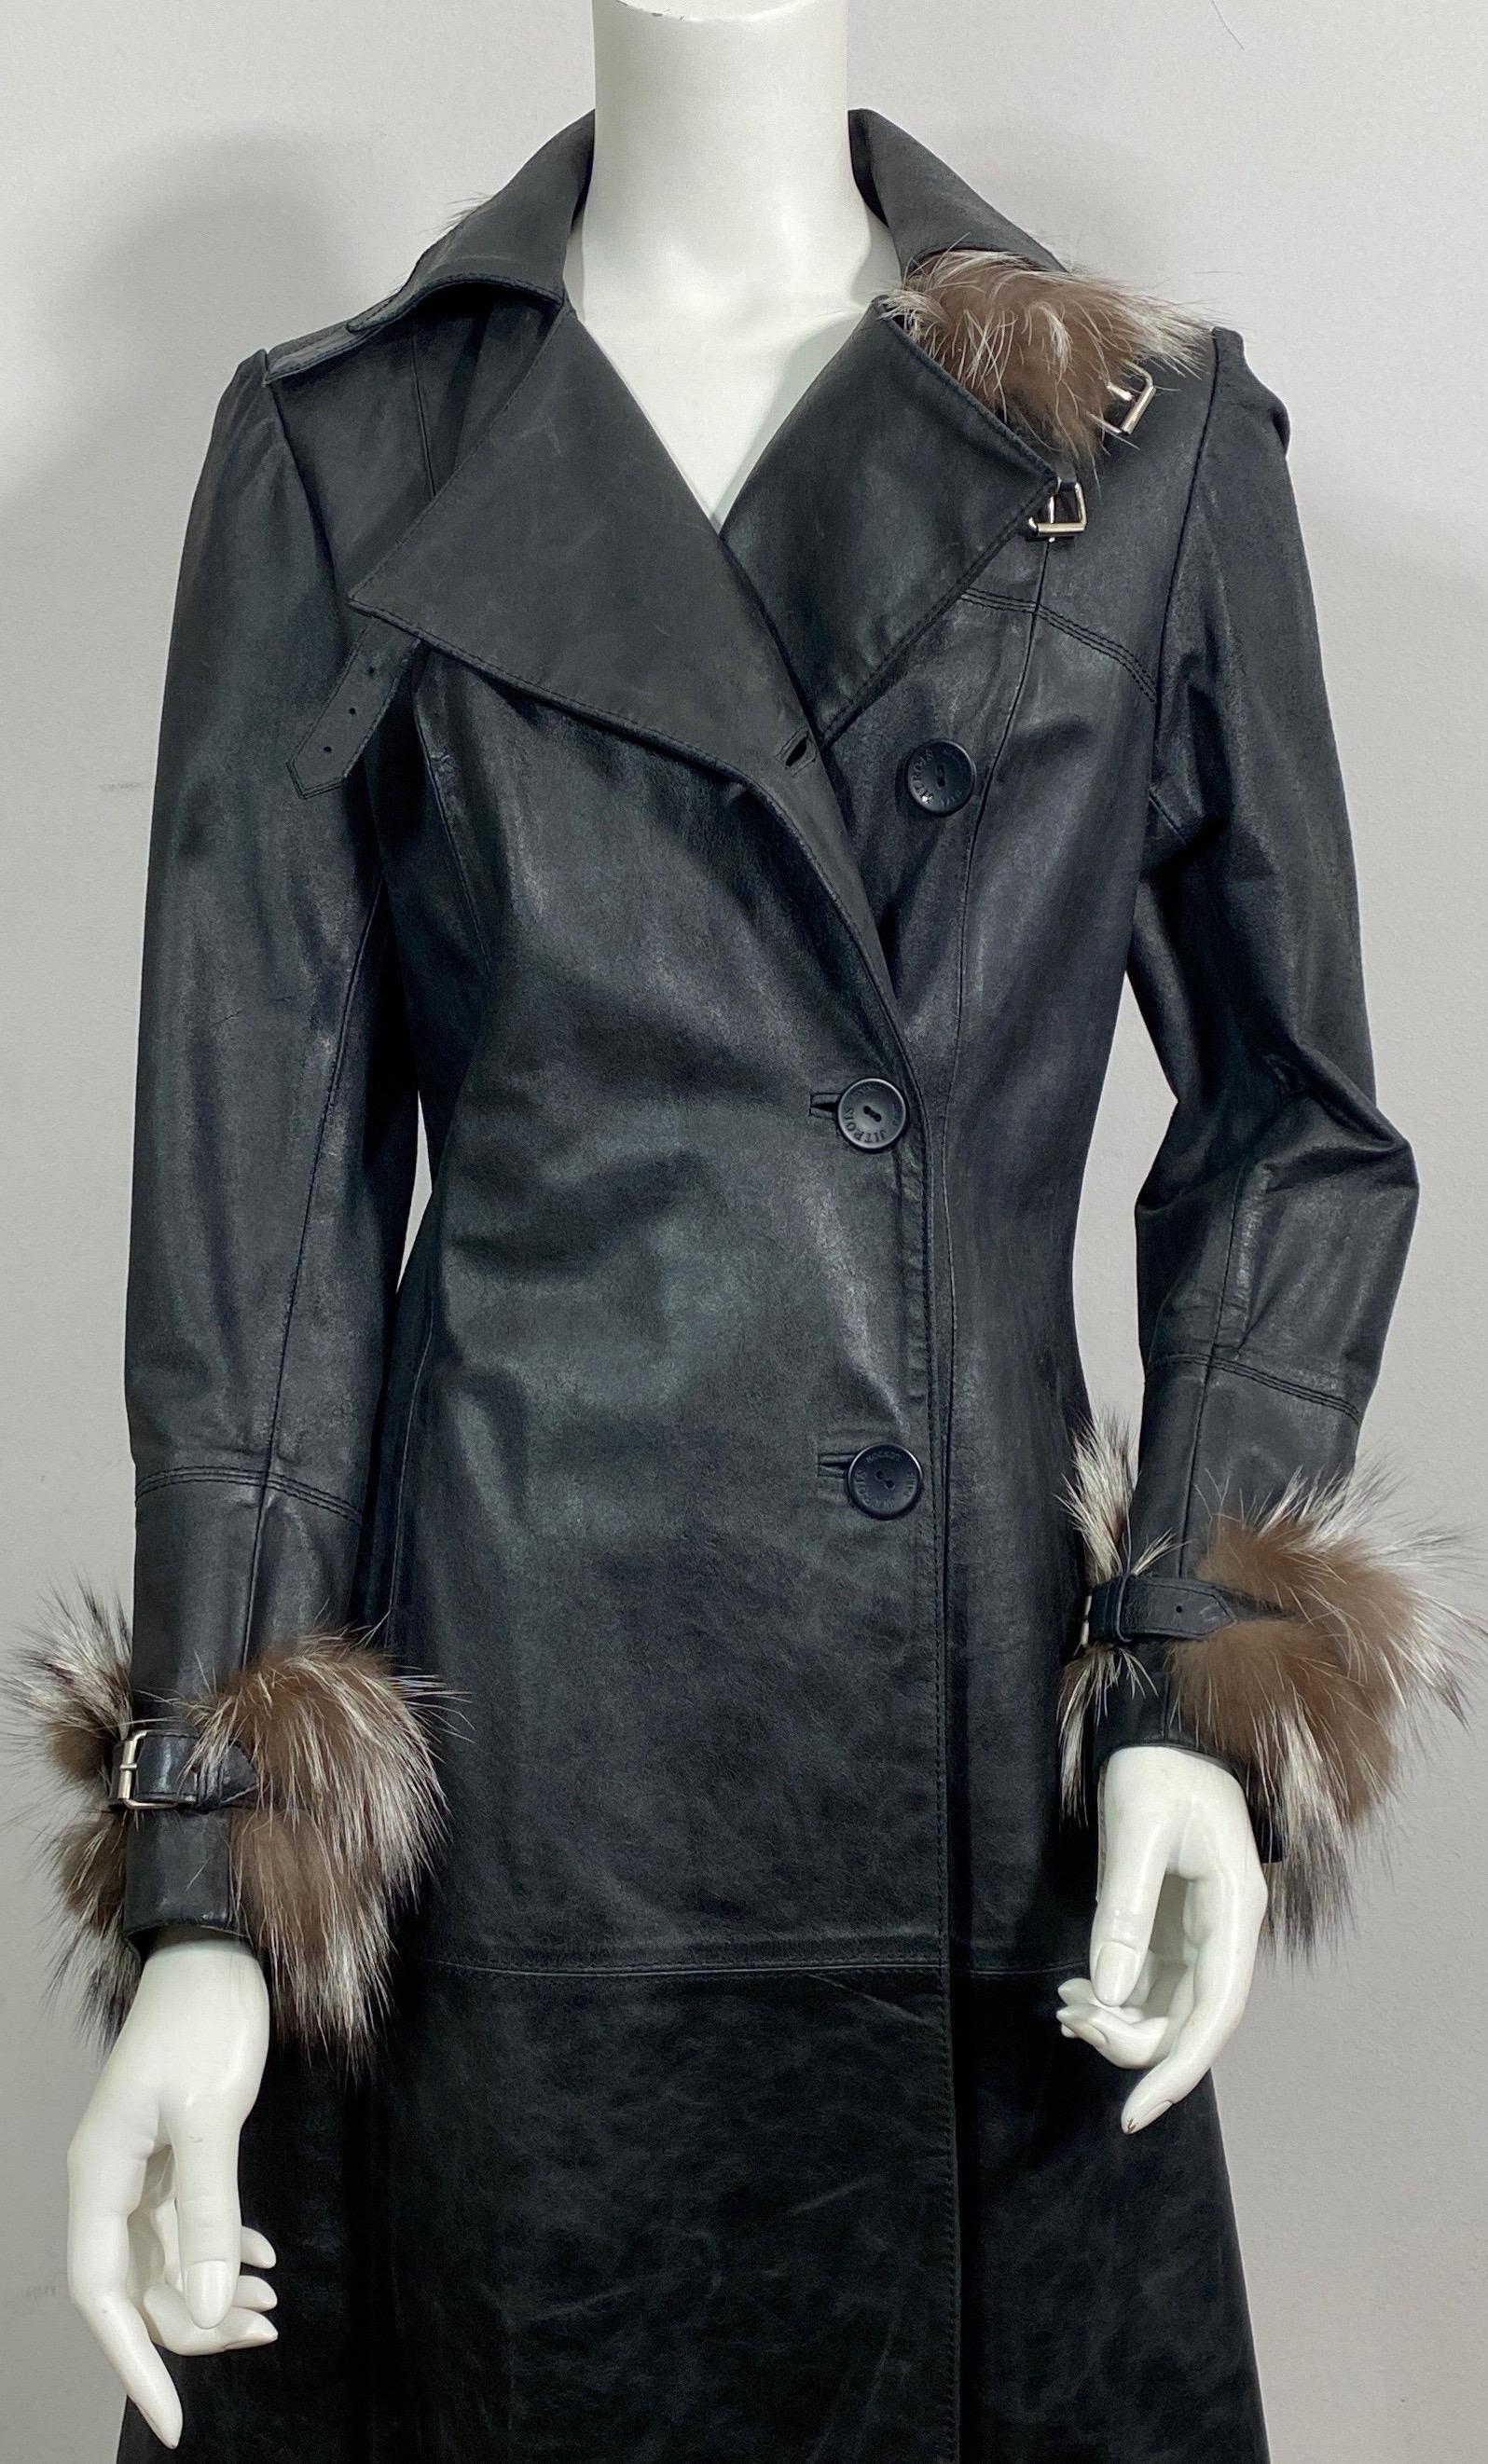 Jean Claude Jitrois Black Nappa Leather Coat with Fox-Size 38 This Vacha Nappa Leather Black Coat has a distressed look with a bit of a very slight shimmer to it. The coat has 1” leather belt like removable attachments that are decorated in 3” Brown